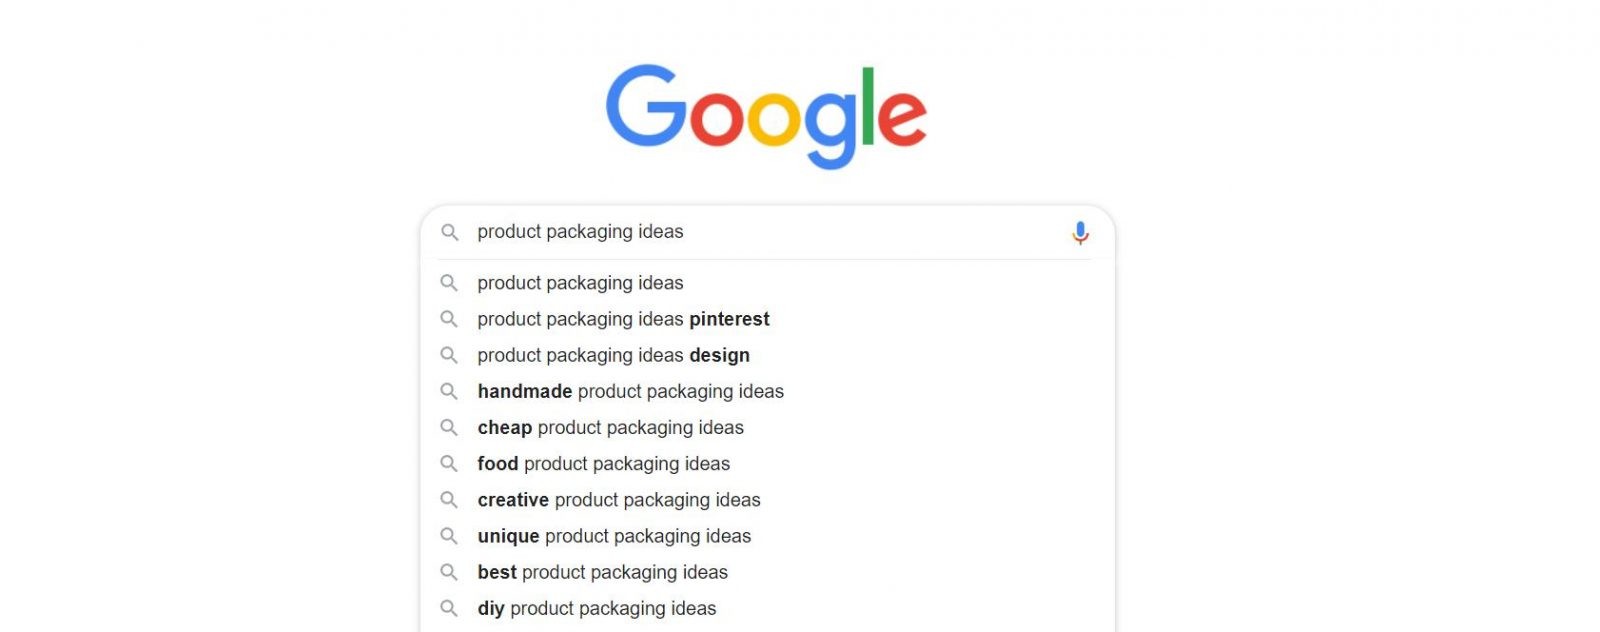 Google search suggestions example screenshot